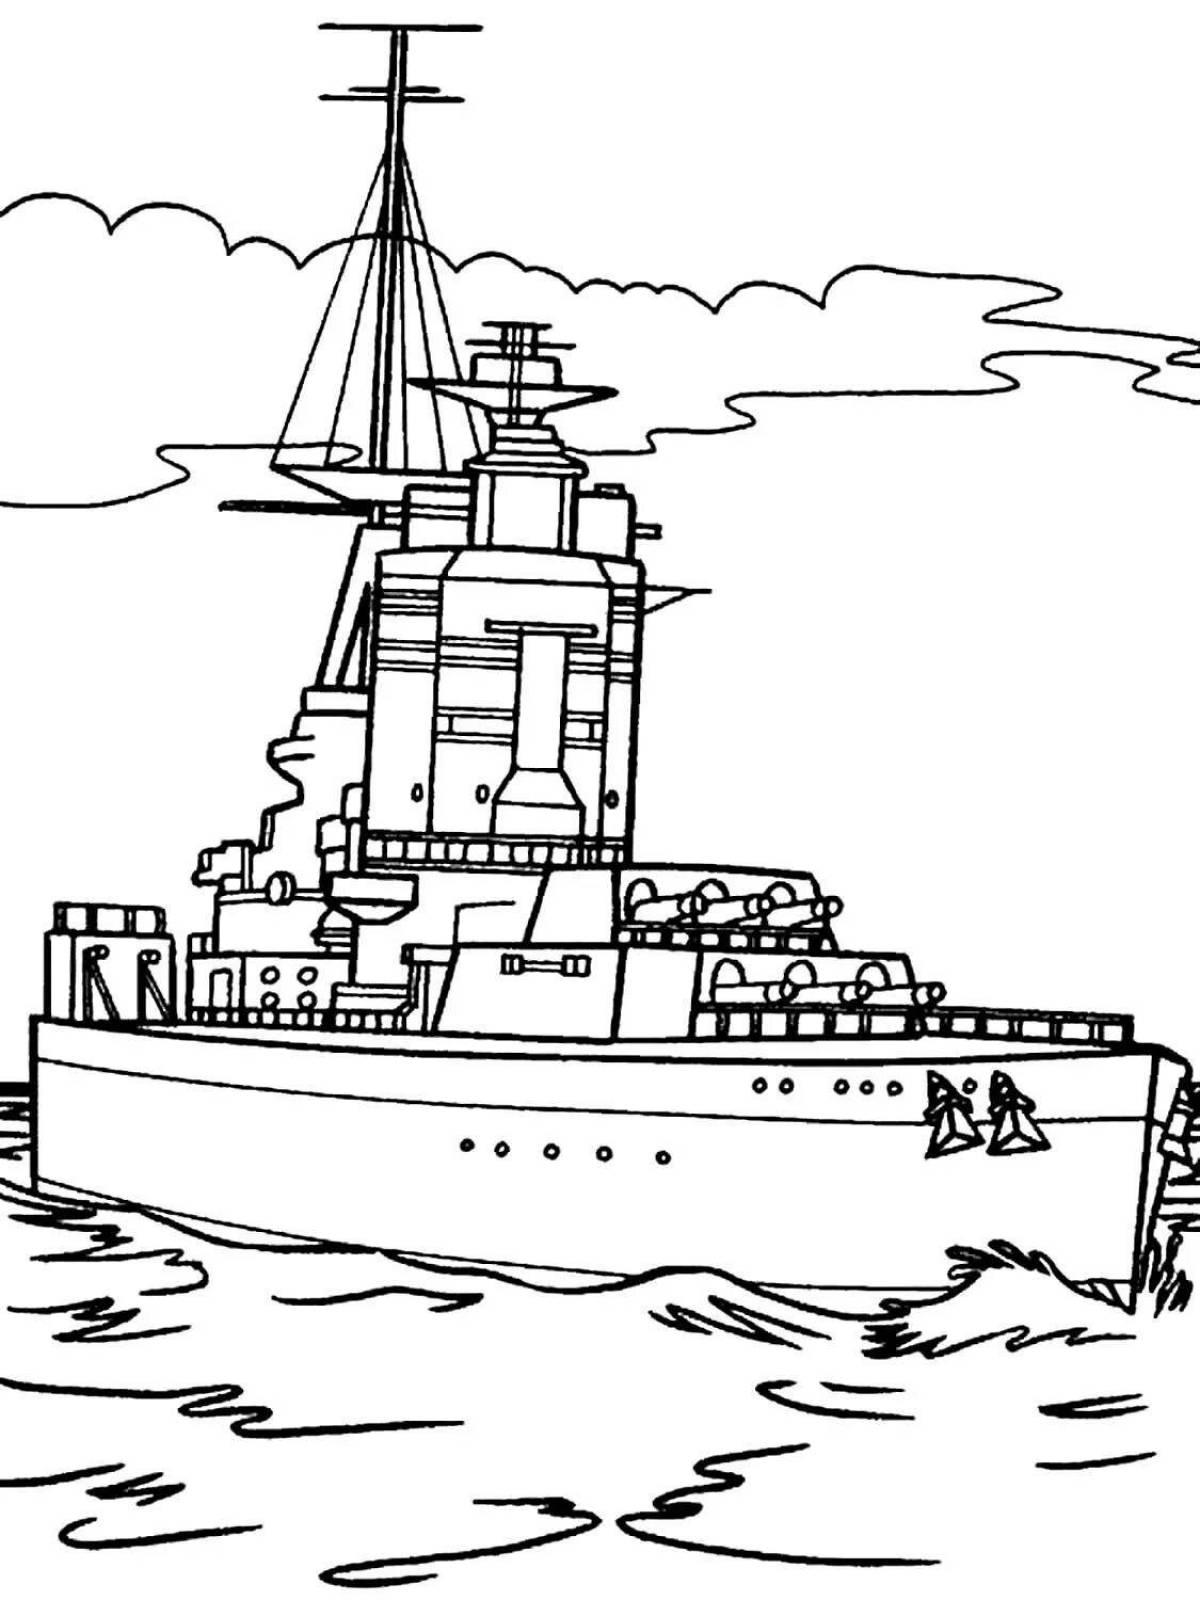 Wonderful Cruiser Aurora Coloring Pages for Kids